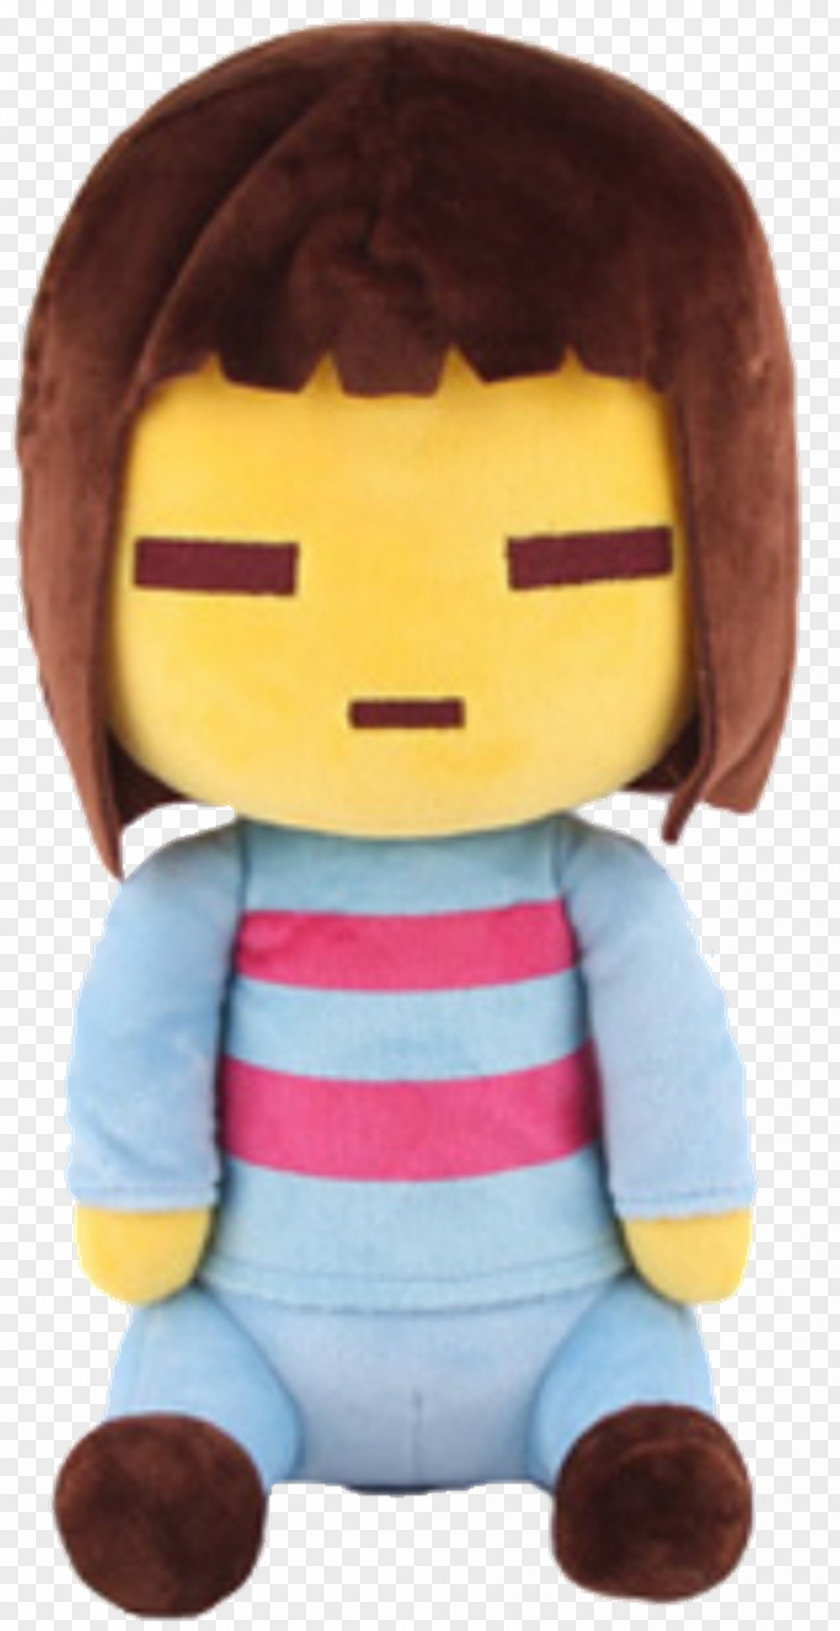 Toy Undertale Stuffed Animals & Cuddly Toys Plush Doll PNG